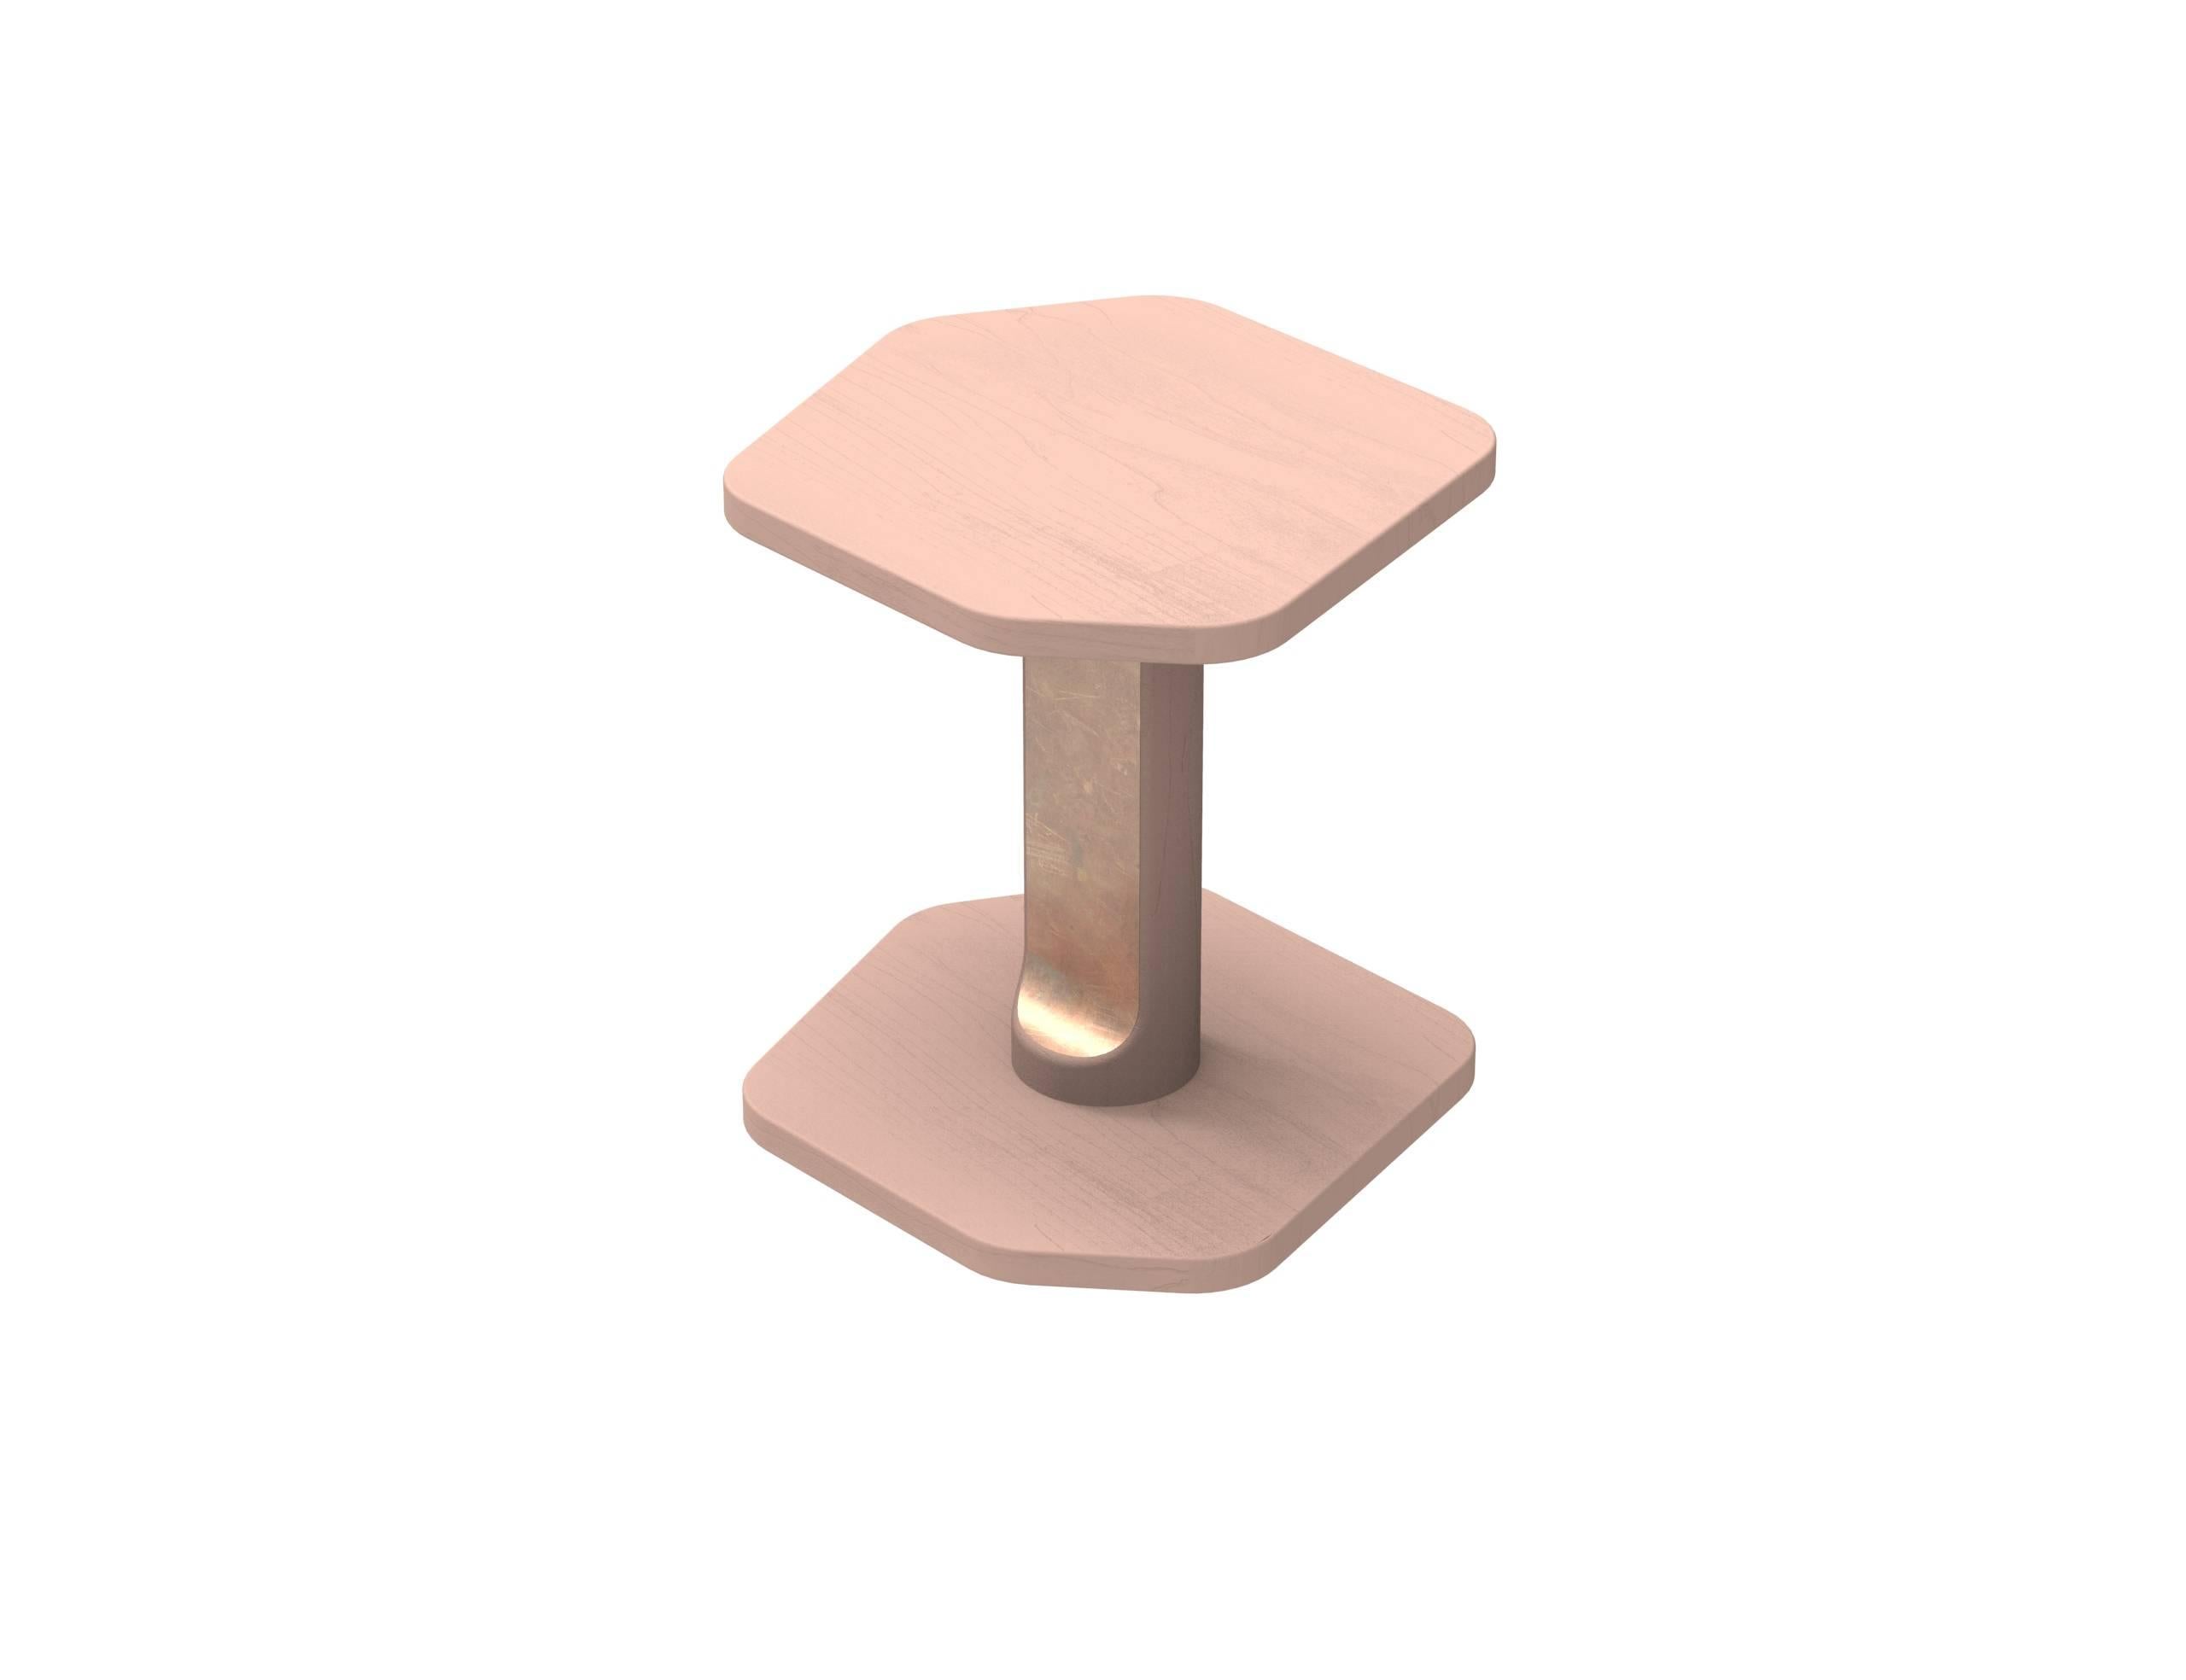 American Heritage 'Flip' Child Chair by Studiokinder in Blush Pigmented Ash with Copper For Sale